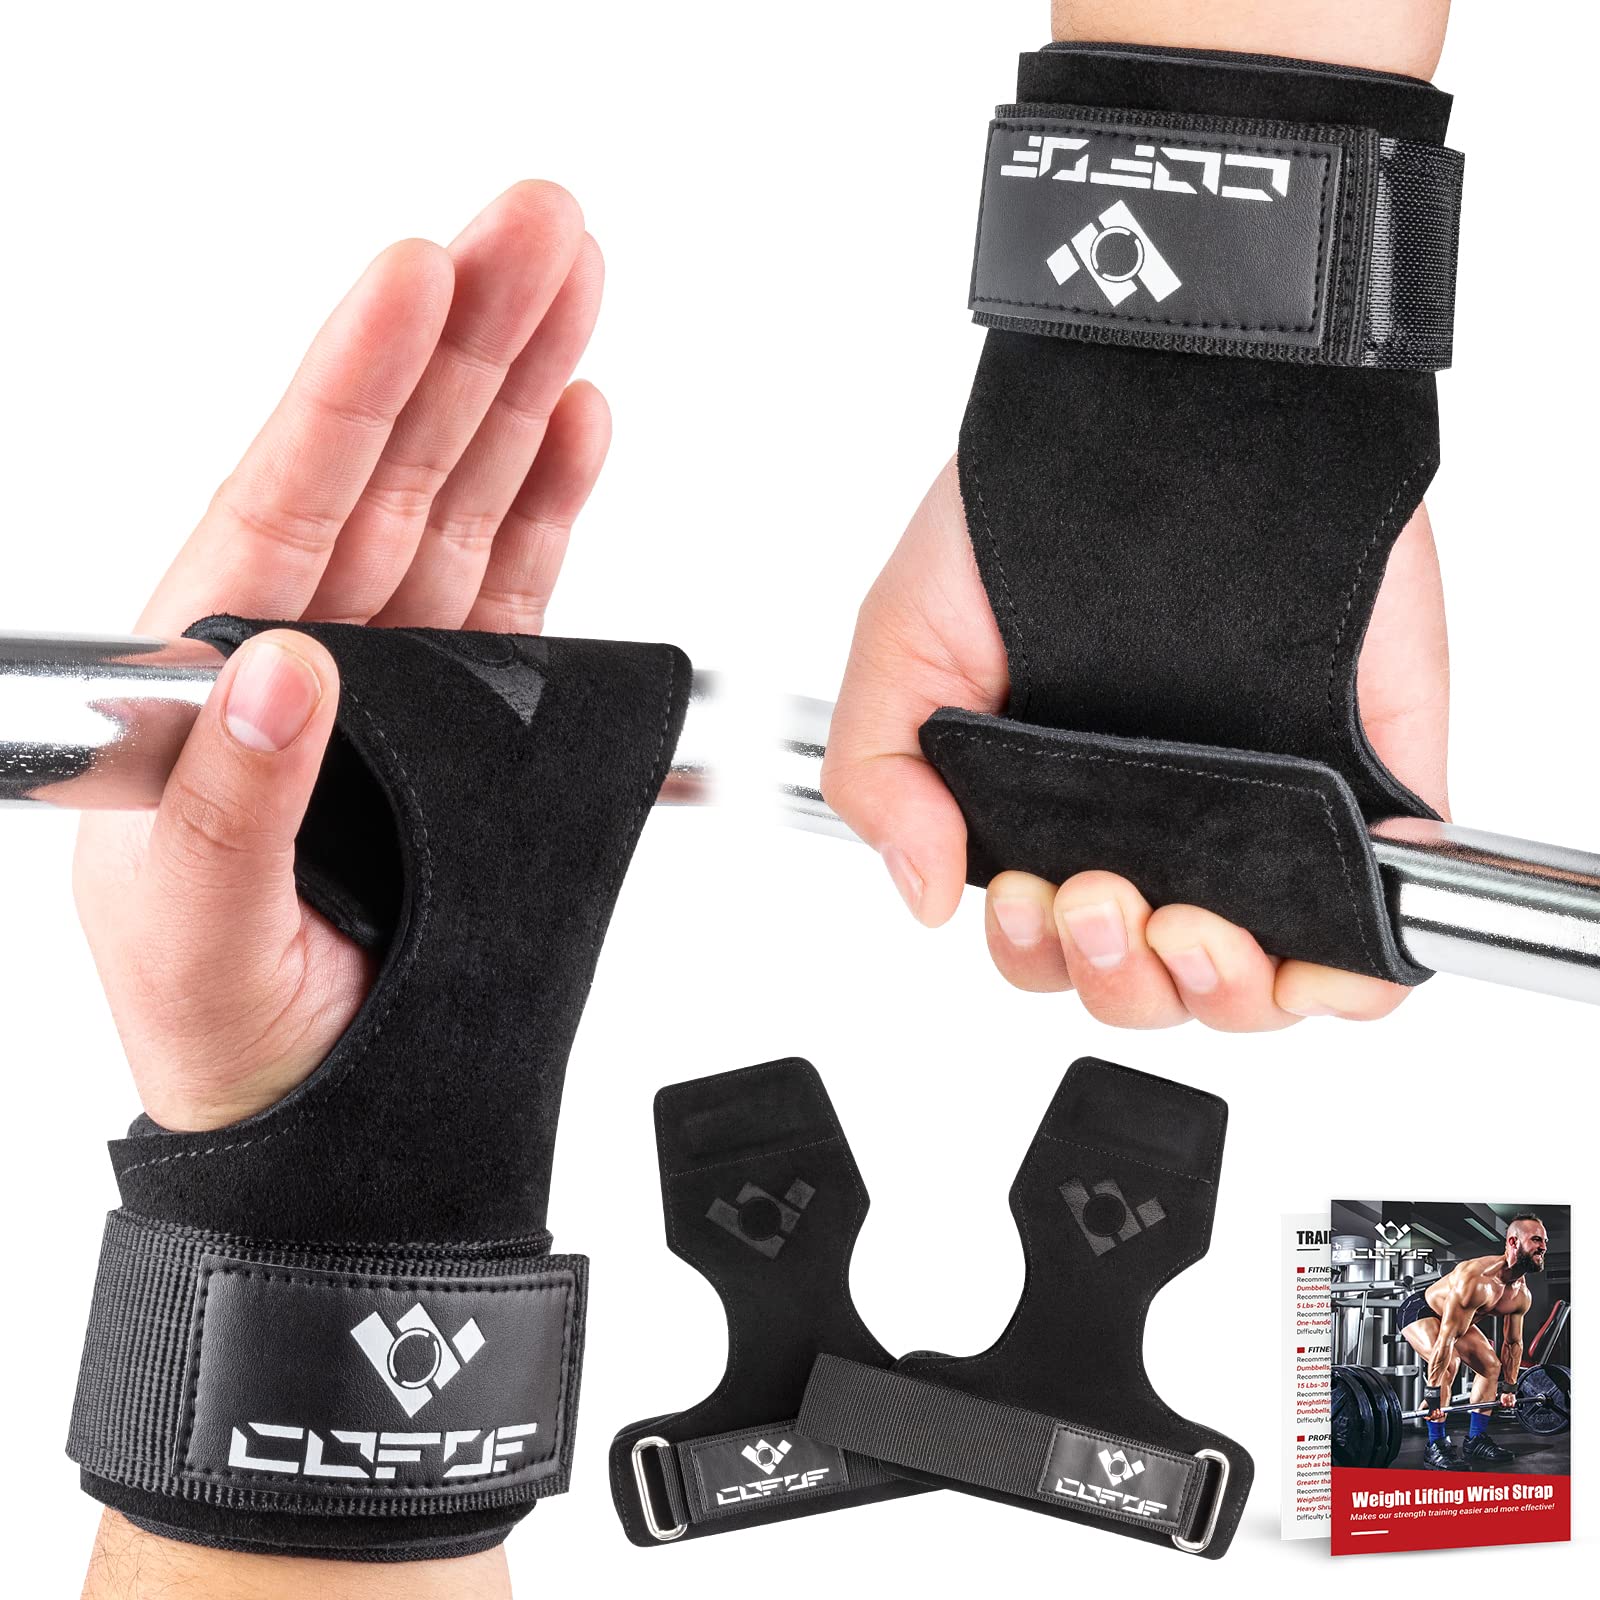 Lifting Straps (1 Pair) - Padded Wrist Support Wraps - for Powerlifting,  Bodybuilding, Gym Workout, Strength Training, Deadlifts & Fitness Workout